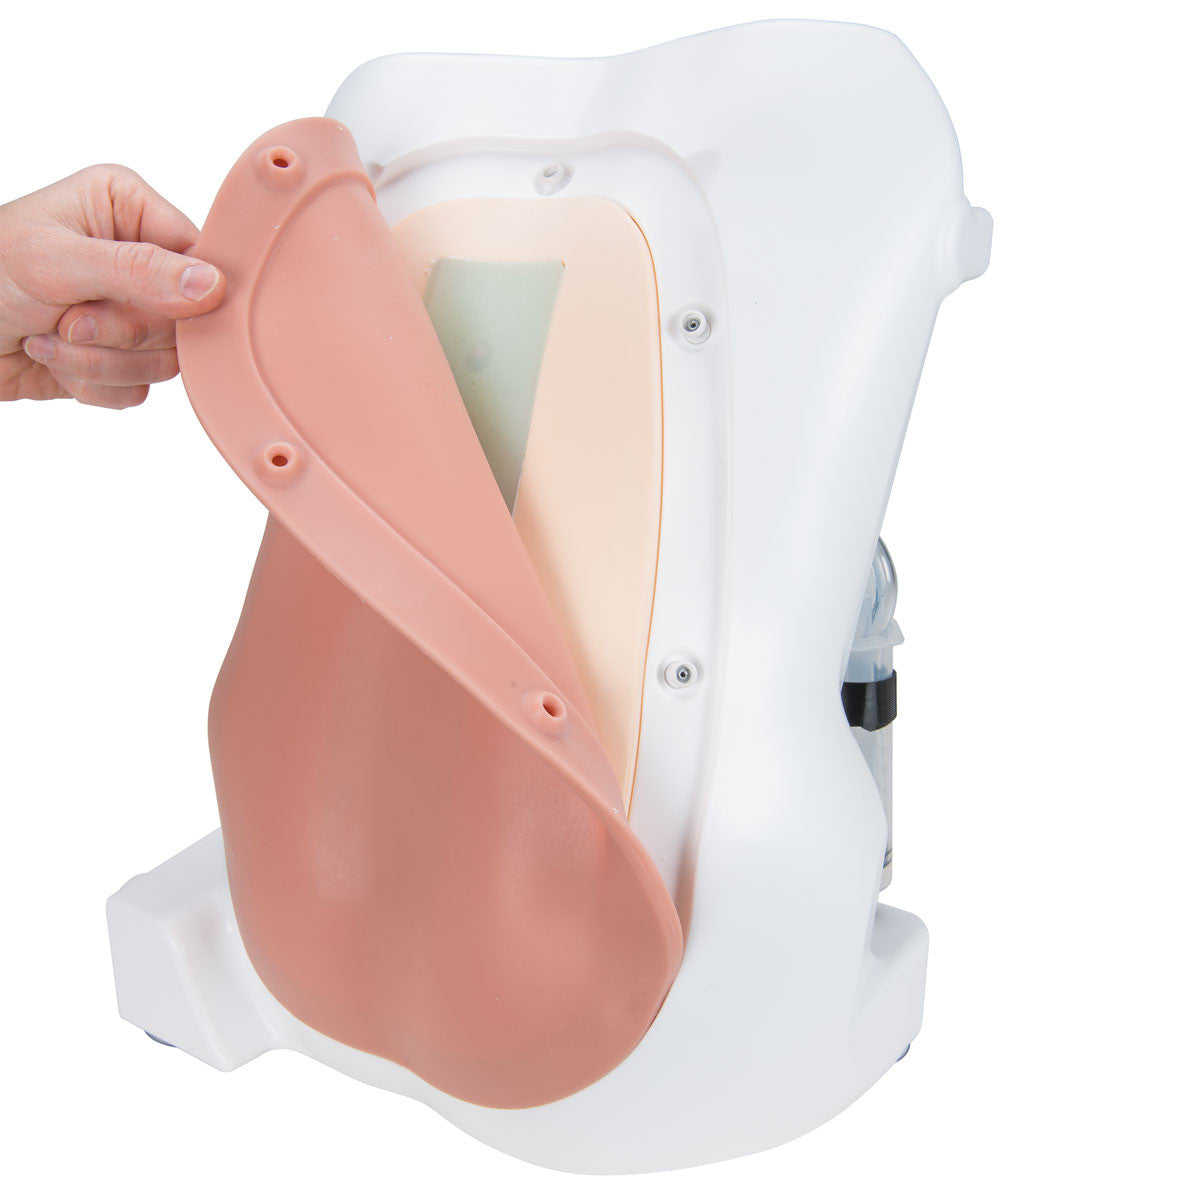 Epidural and Spinal Injection Trainer | 3B Scientific P61 - replacement skin